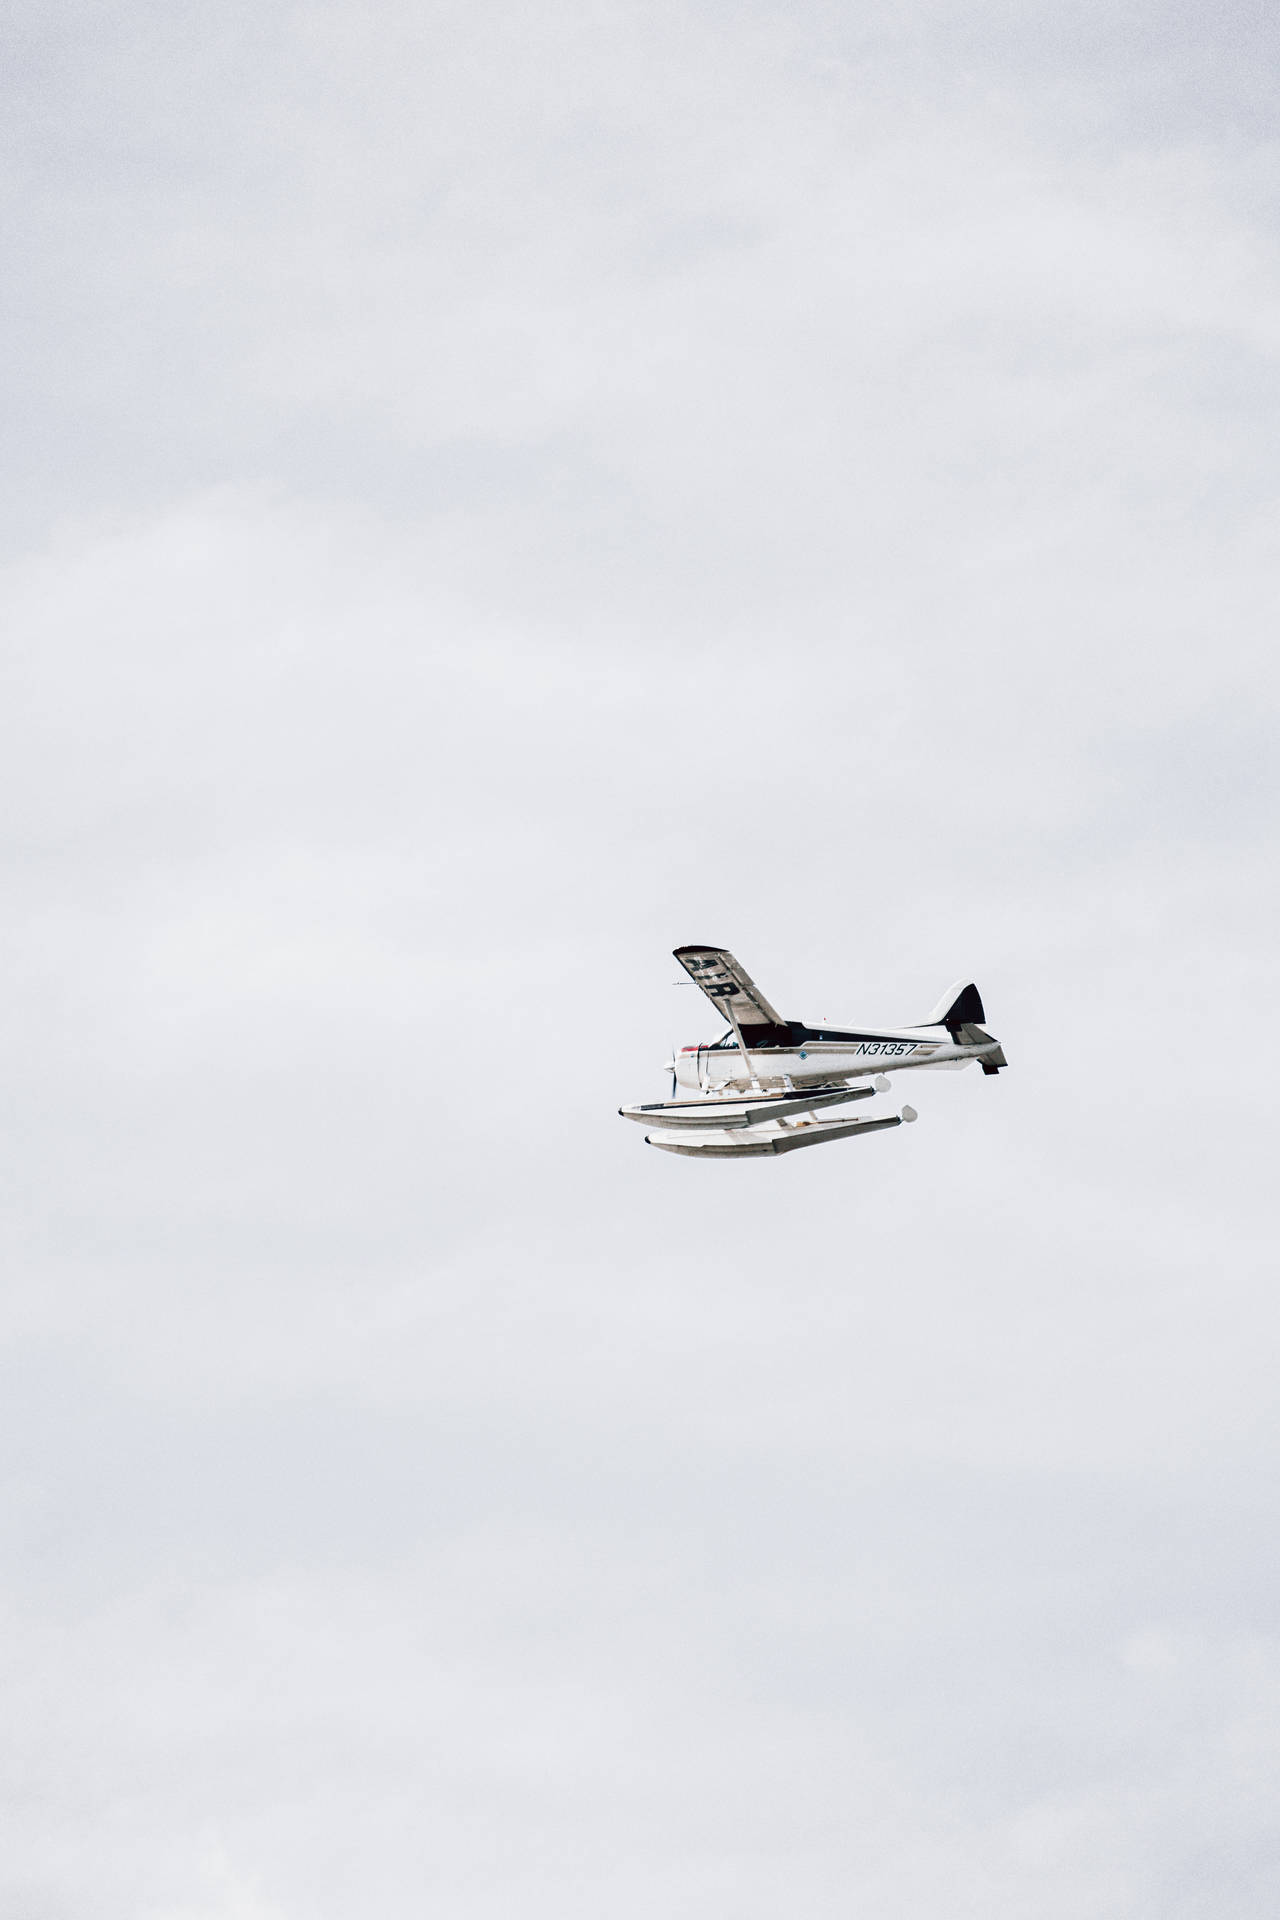 White and Black Small Plane Taking Off Wallpaper